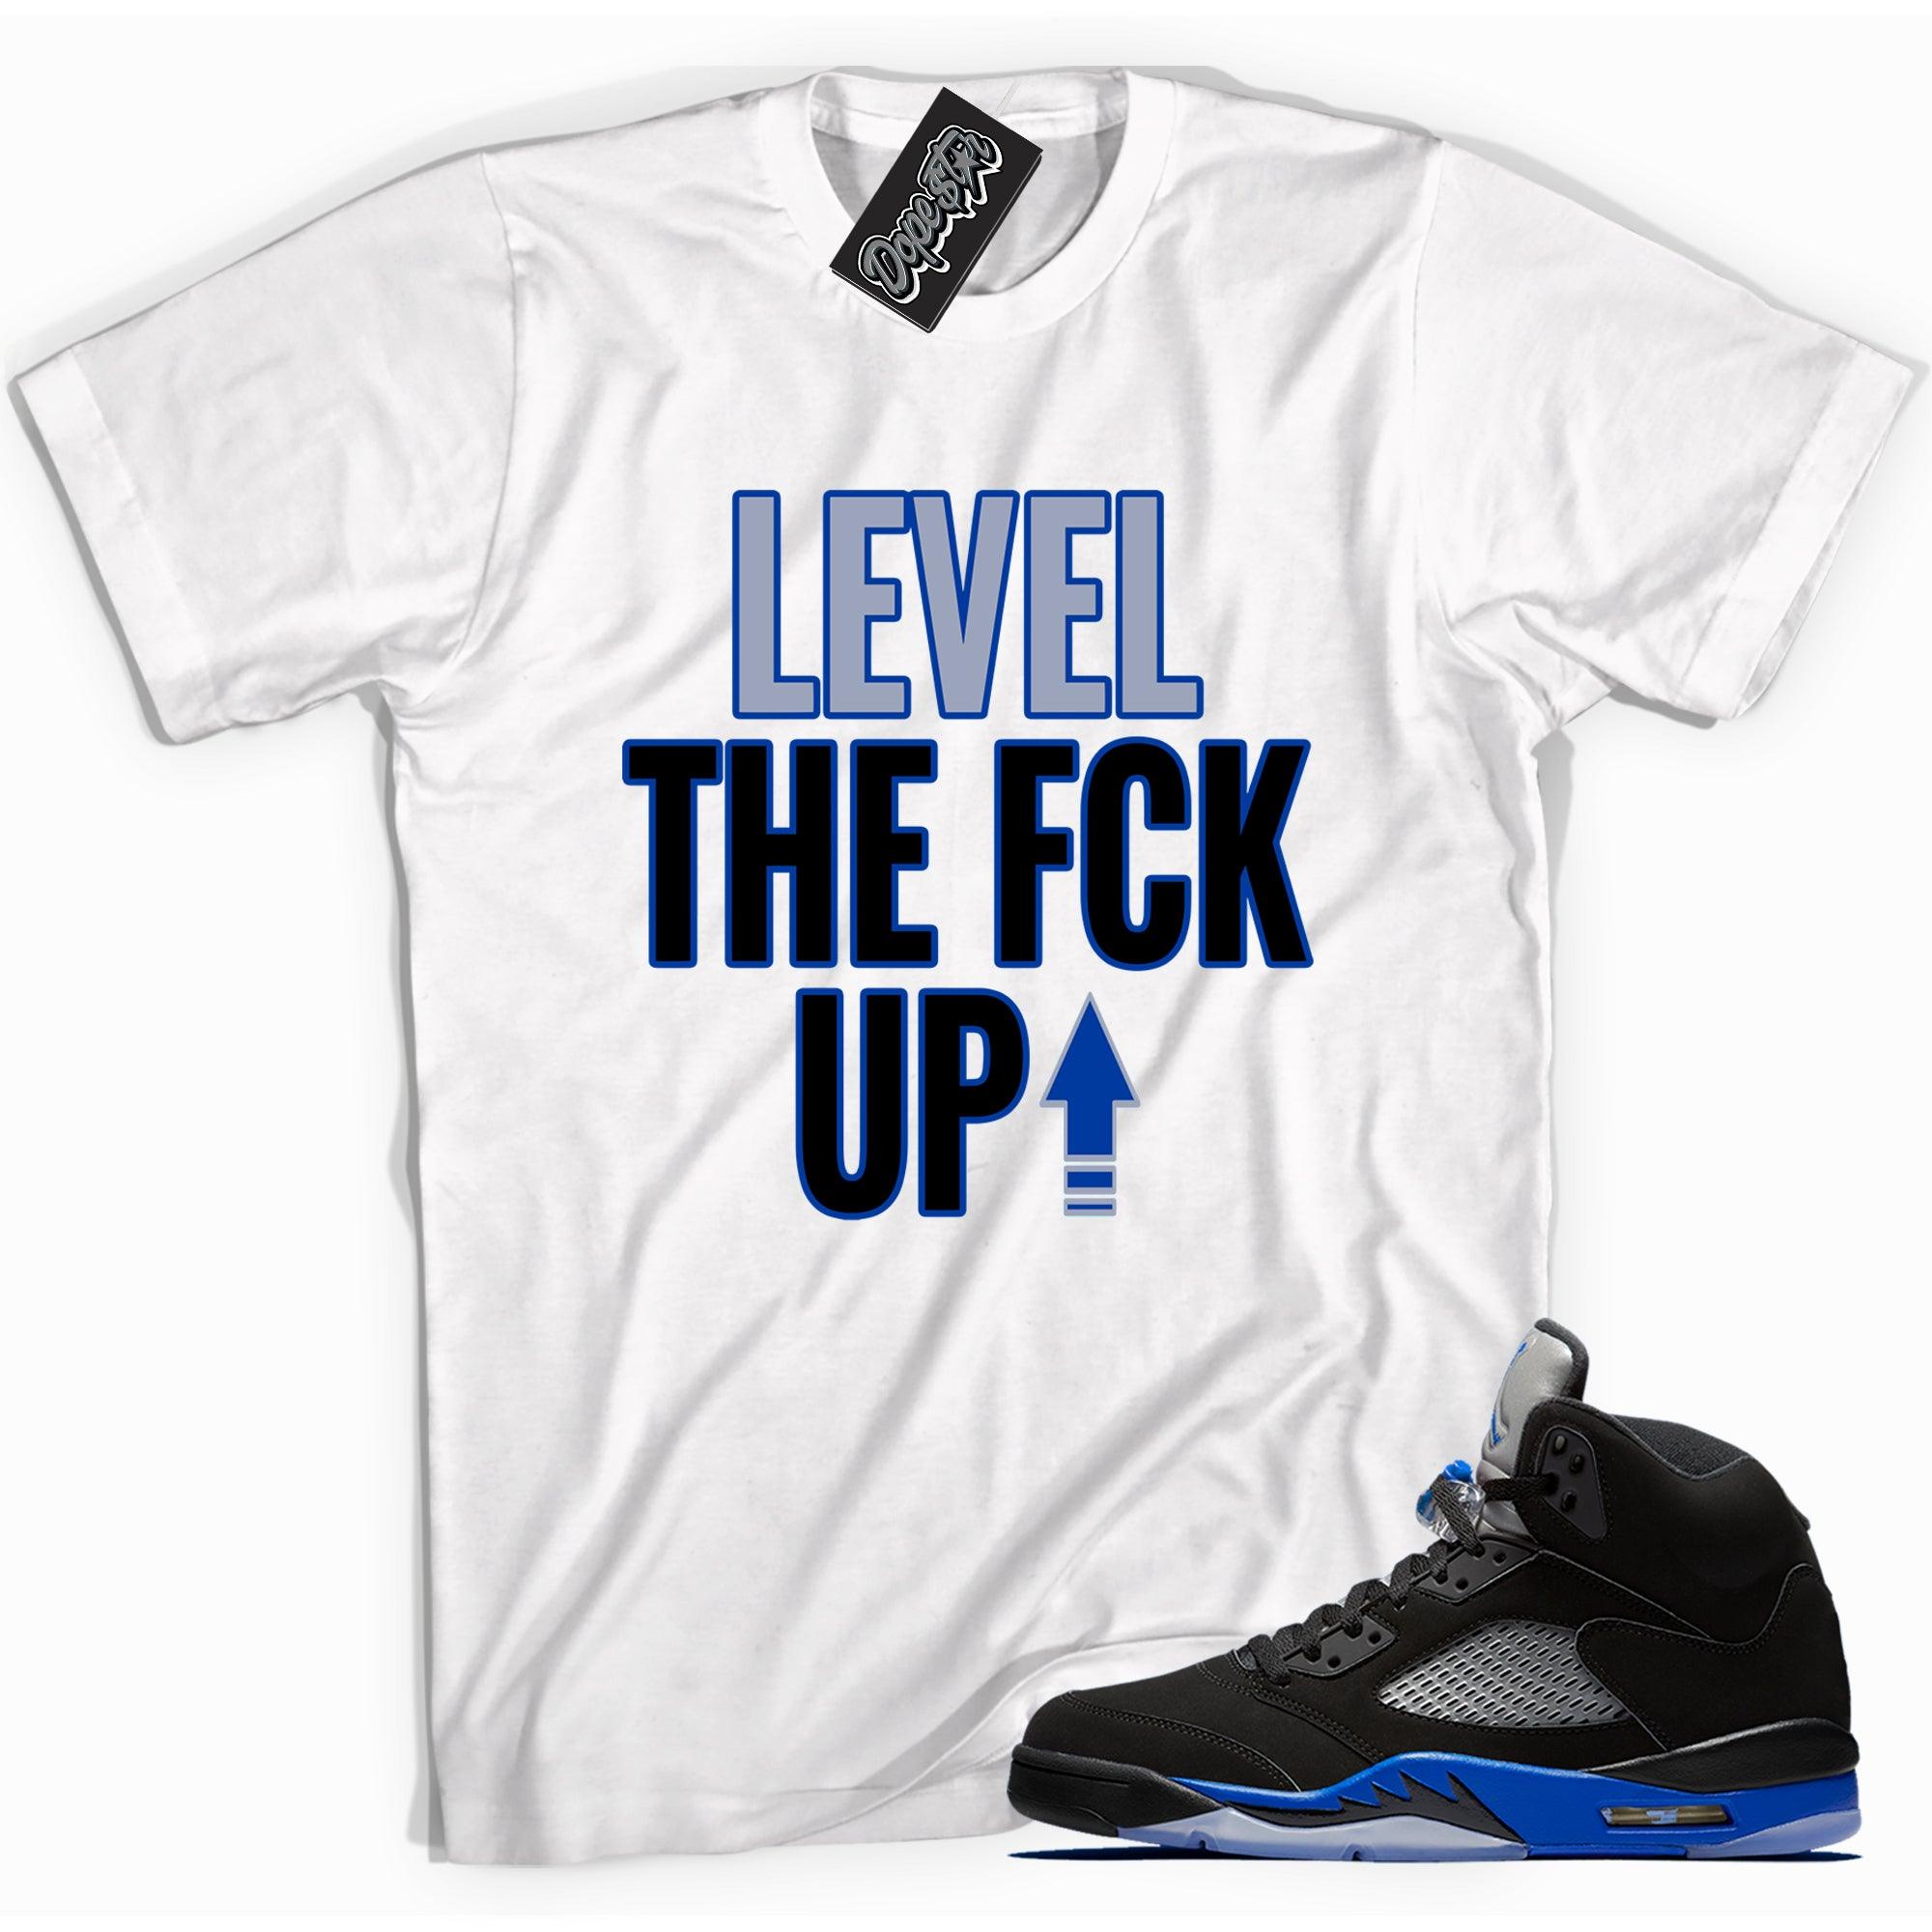 Cool white graphic tee with 'Level Up' print, that perfectly matches Air Jordan 5 Racer Blue Toe sneakers.